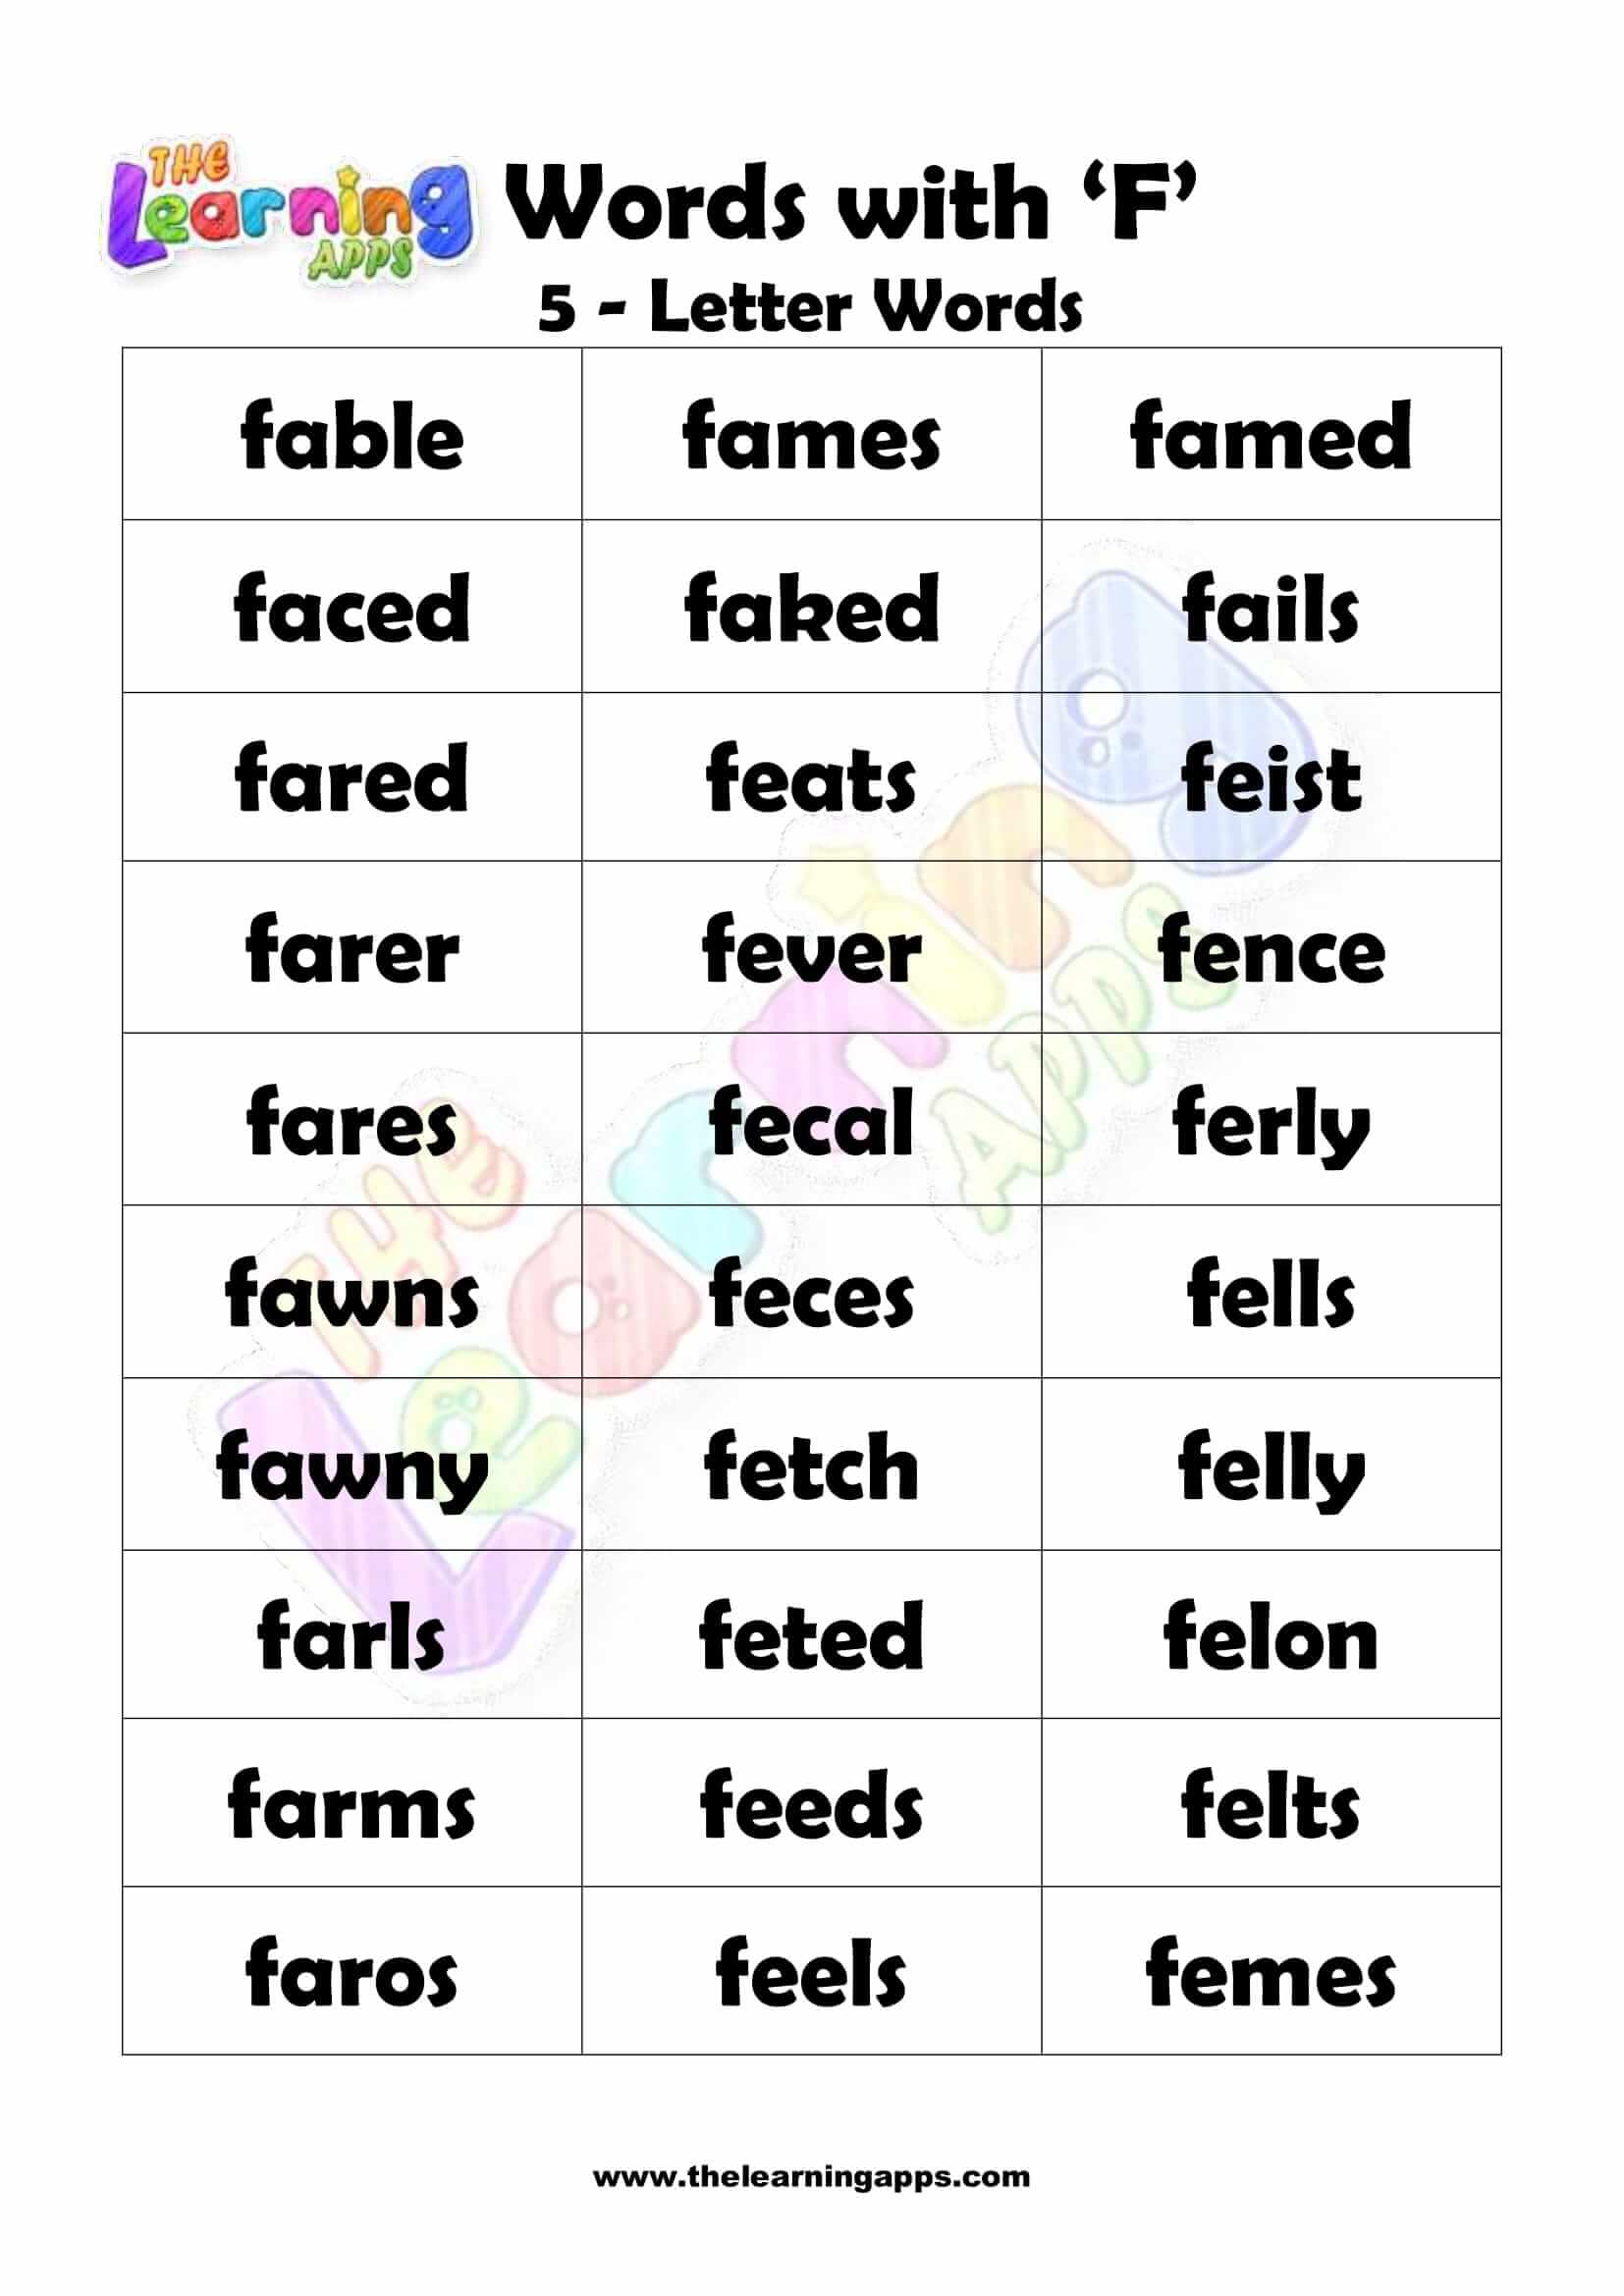 5 LETTER WORD STARTING WITH F-2